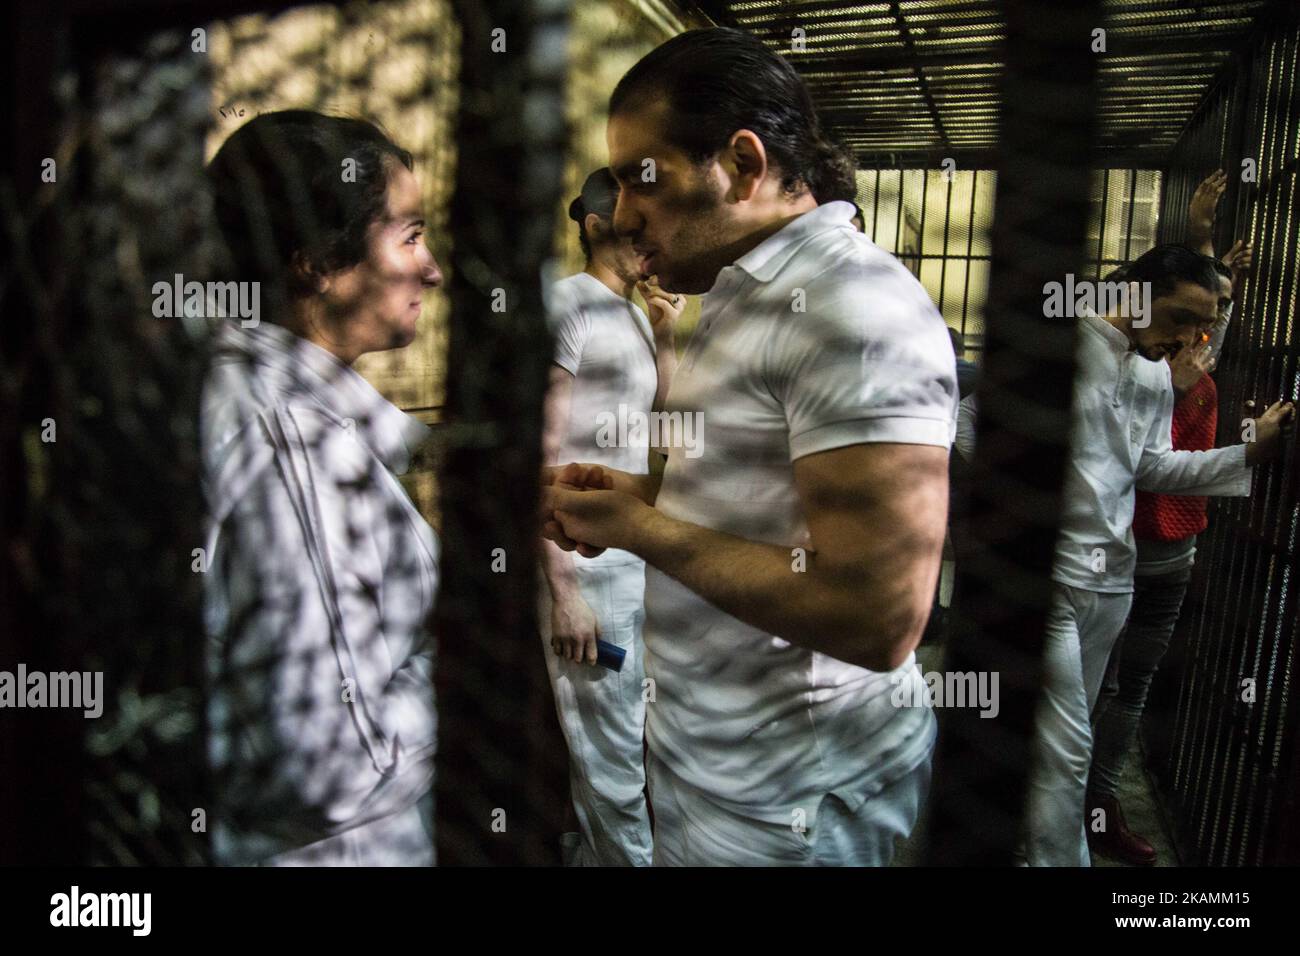 Founder of the Beladi Foundation in Egypt, Egyptian-American Aya Hegazy (L) and her husband Mohamed Hussanain (R) are seen inside the defendent's cage after being acquitted by an Egyptian court, Cairo, Egypt, 16 April 2017. (Photo by Asmaa Gamal/NurPhoto) *** Please Use Credit from Credit Field *** Stock Photo